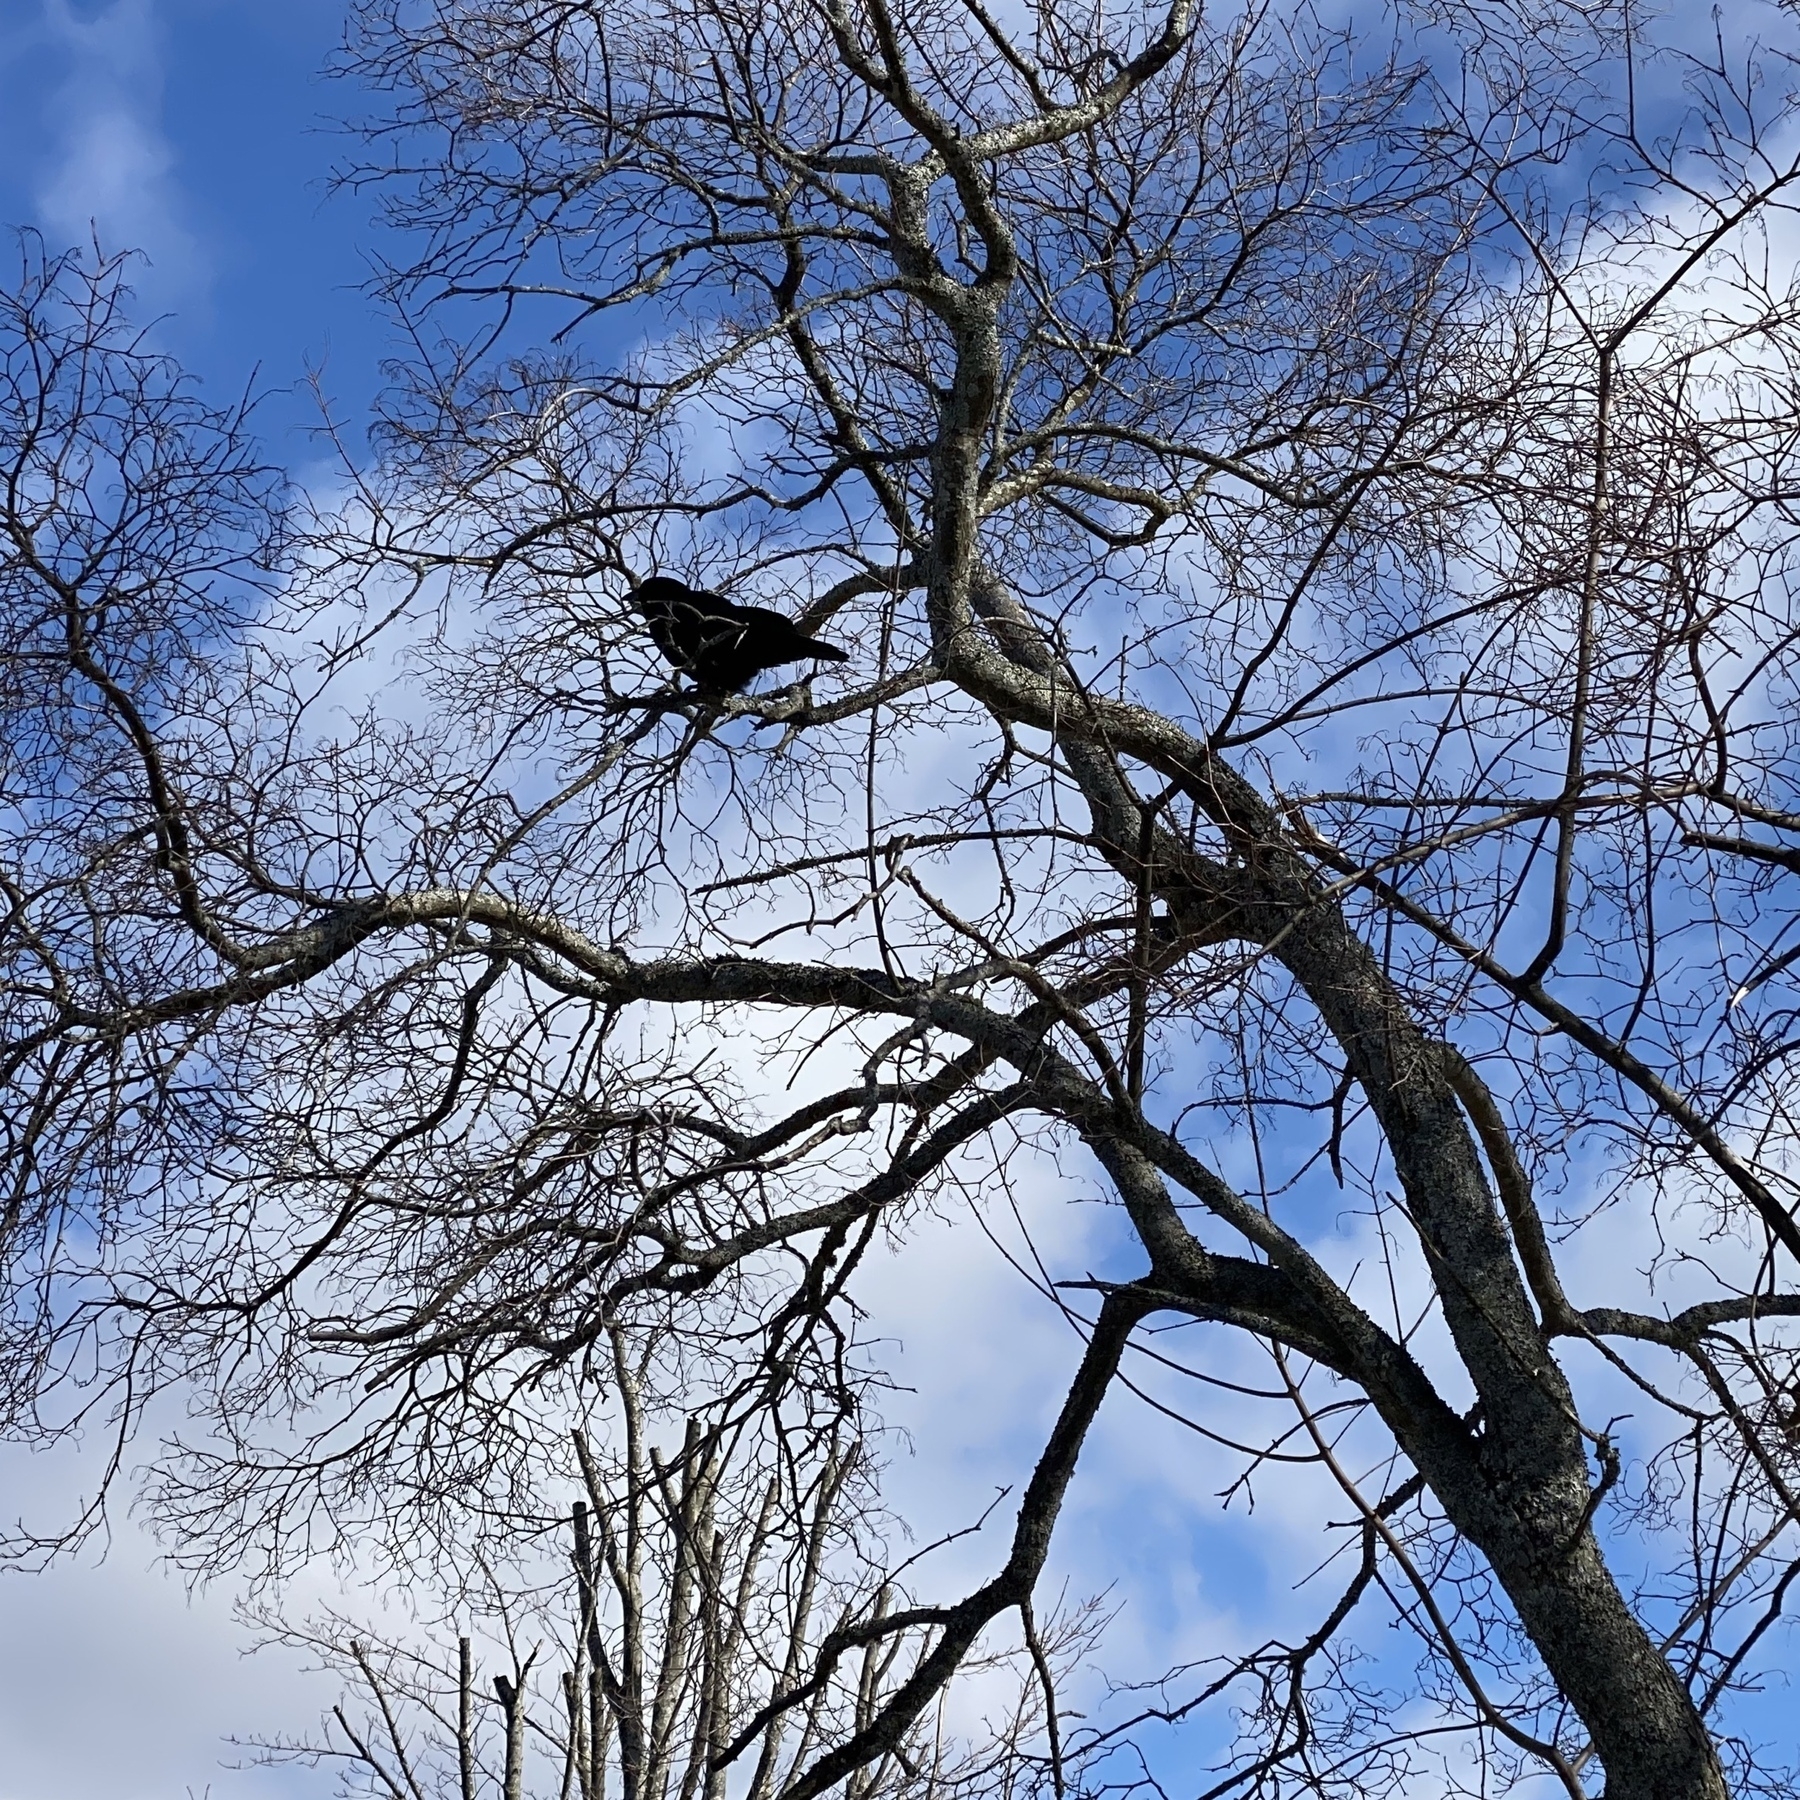 Crow in branches of a tree.